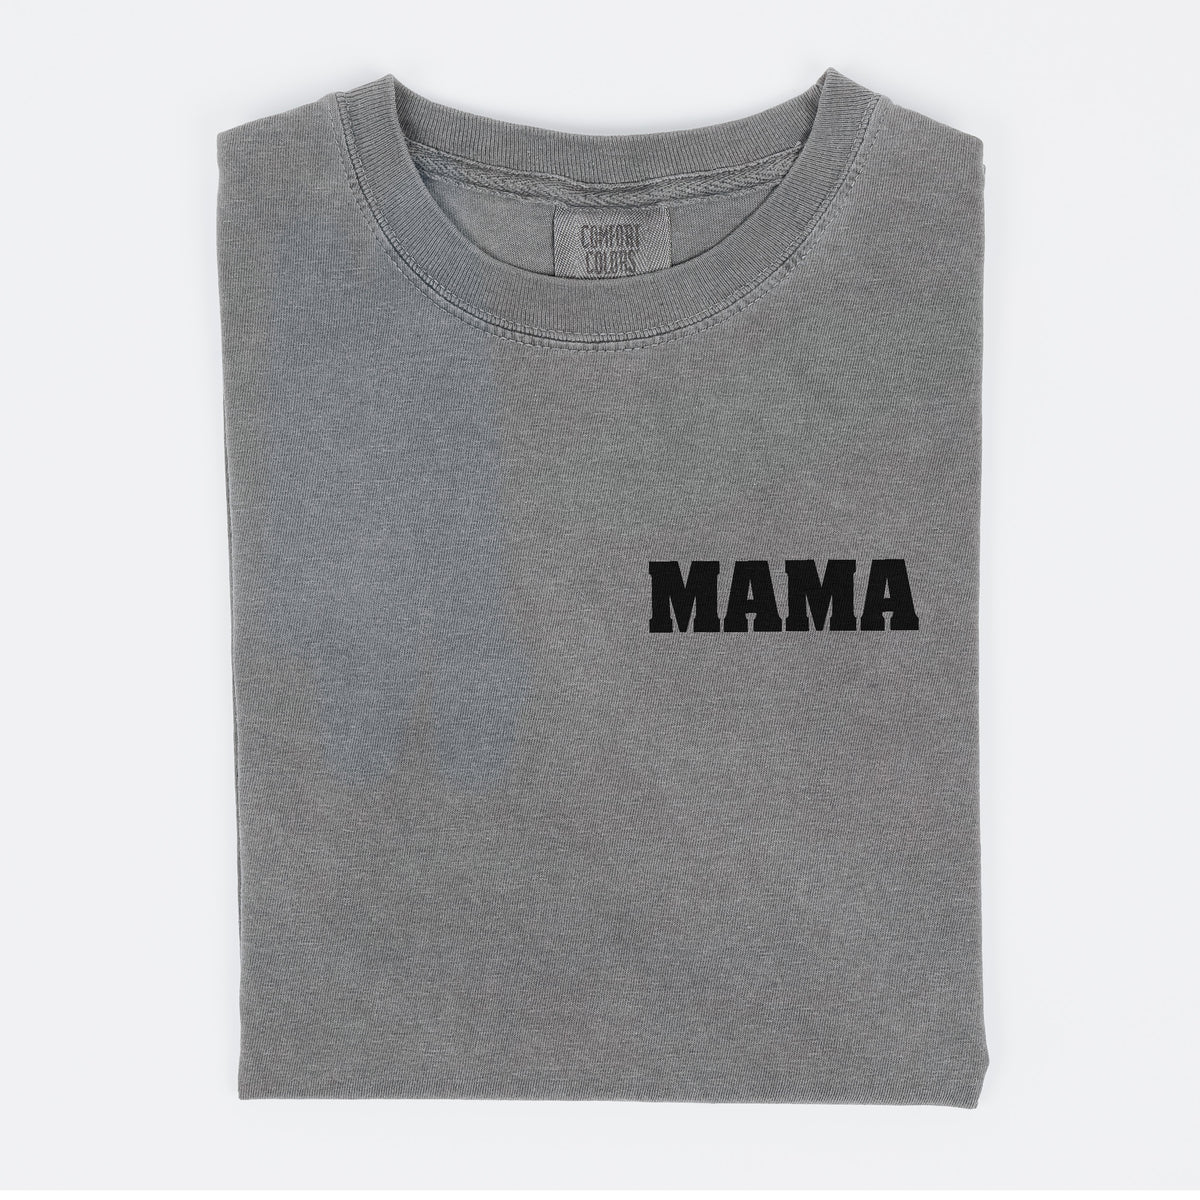 Mama | Adult Comfort Colors Tee in Gray